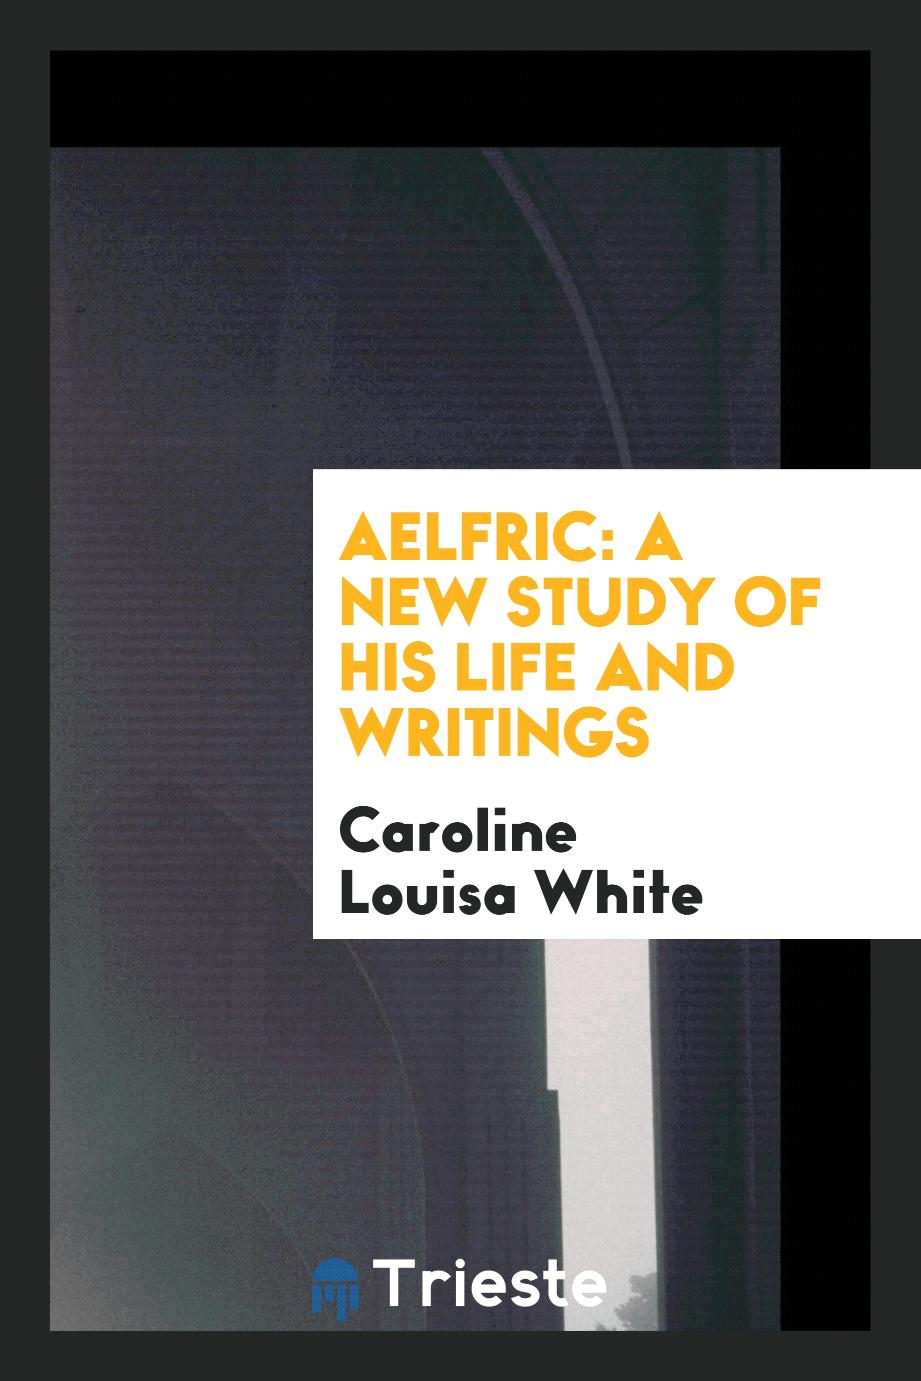 Aelfric: a new study of his life and writings